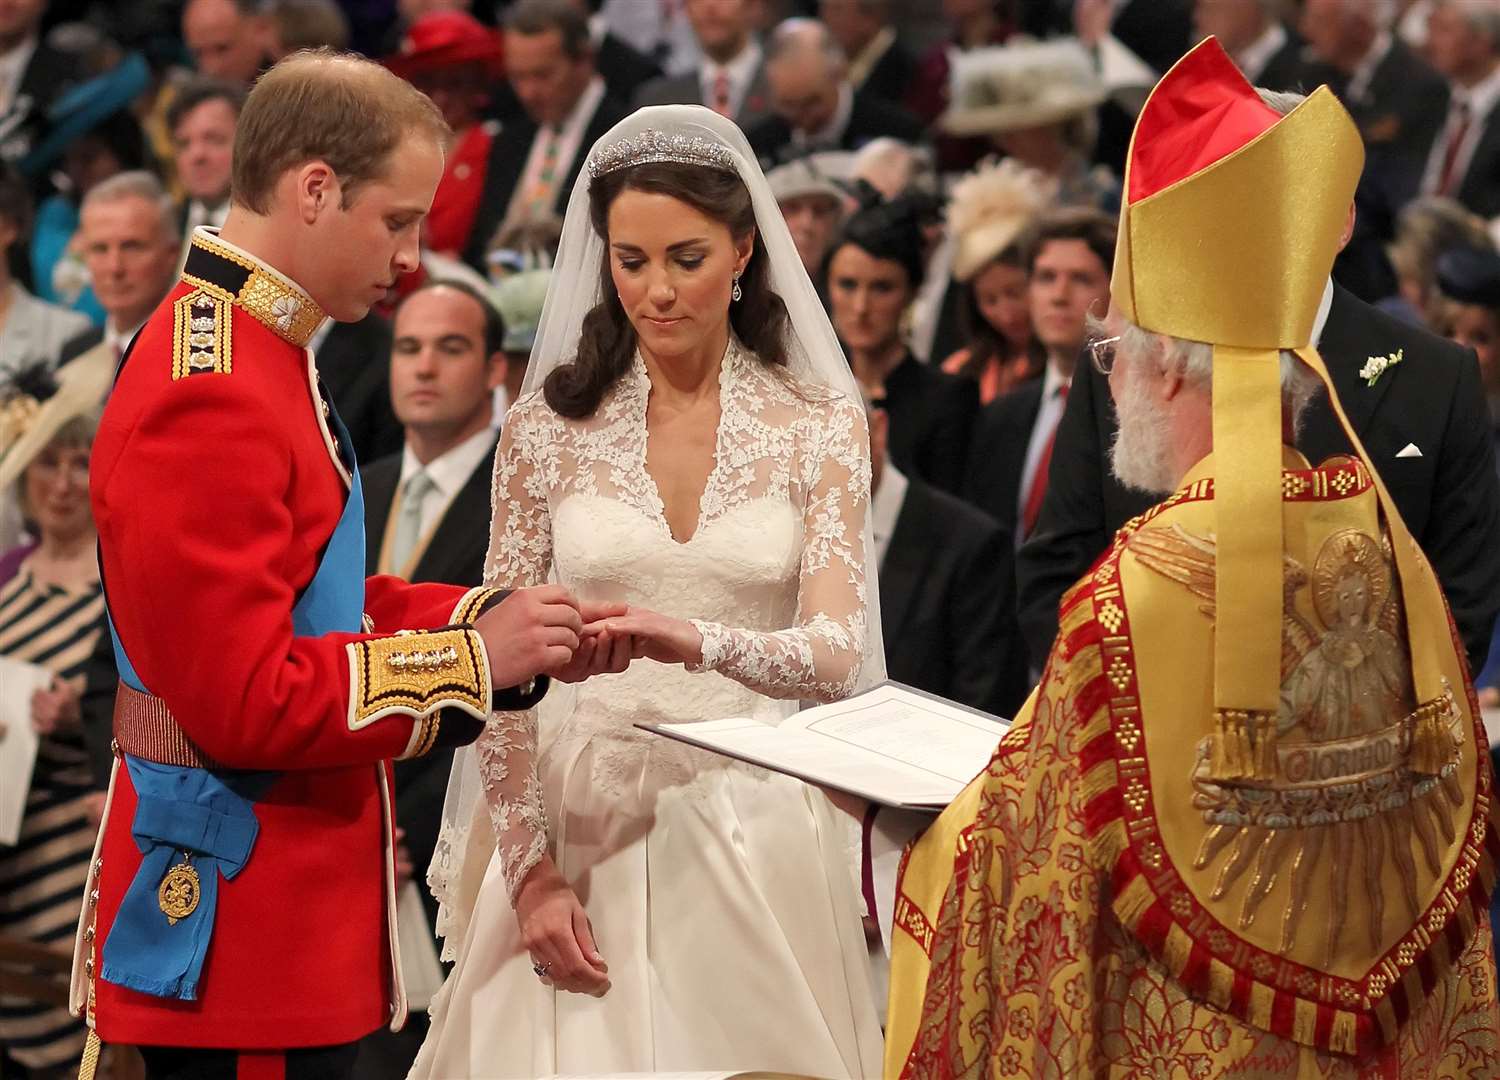 The Duke of Cambridge and Kate Middleton exchange rings in front of the Archbishop of Canterbury at Westminster Abbey in 2011 (Dominic Lipinski/PA)